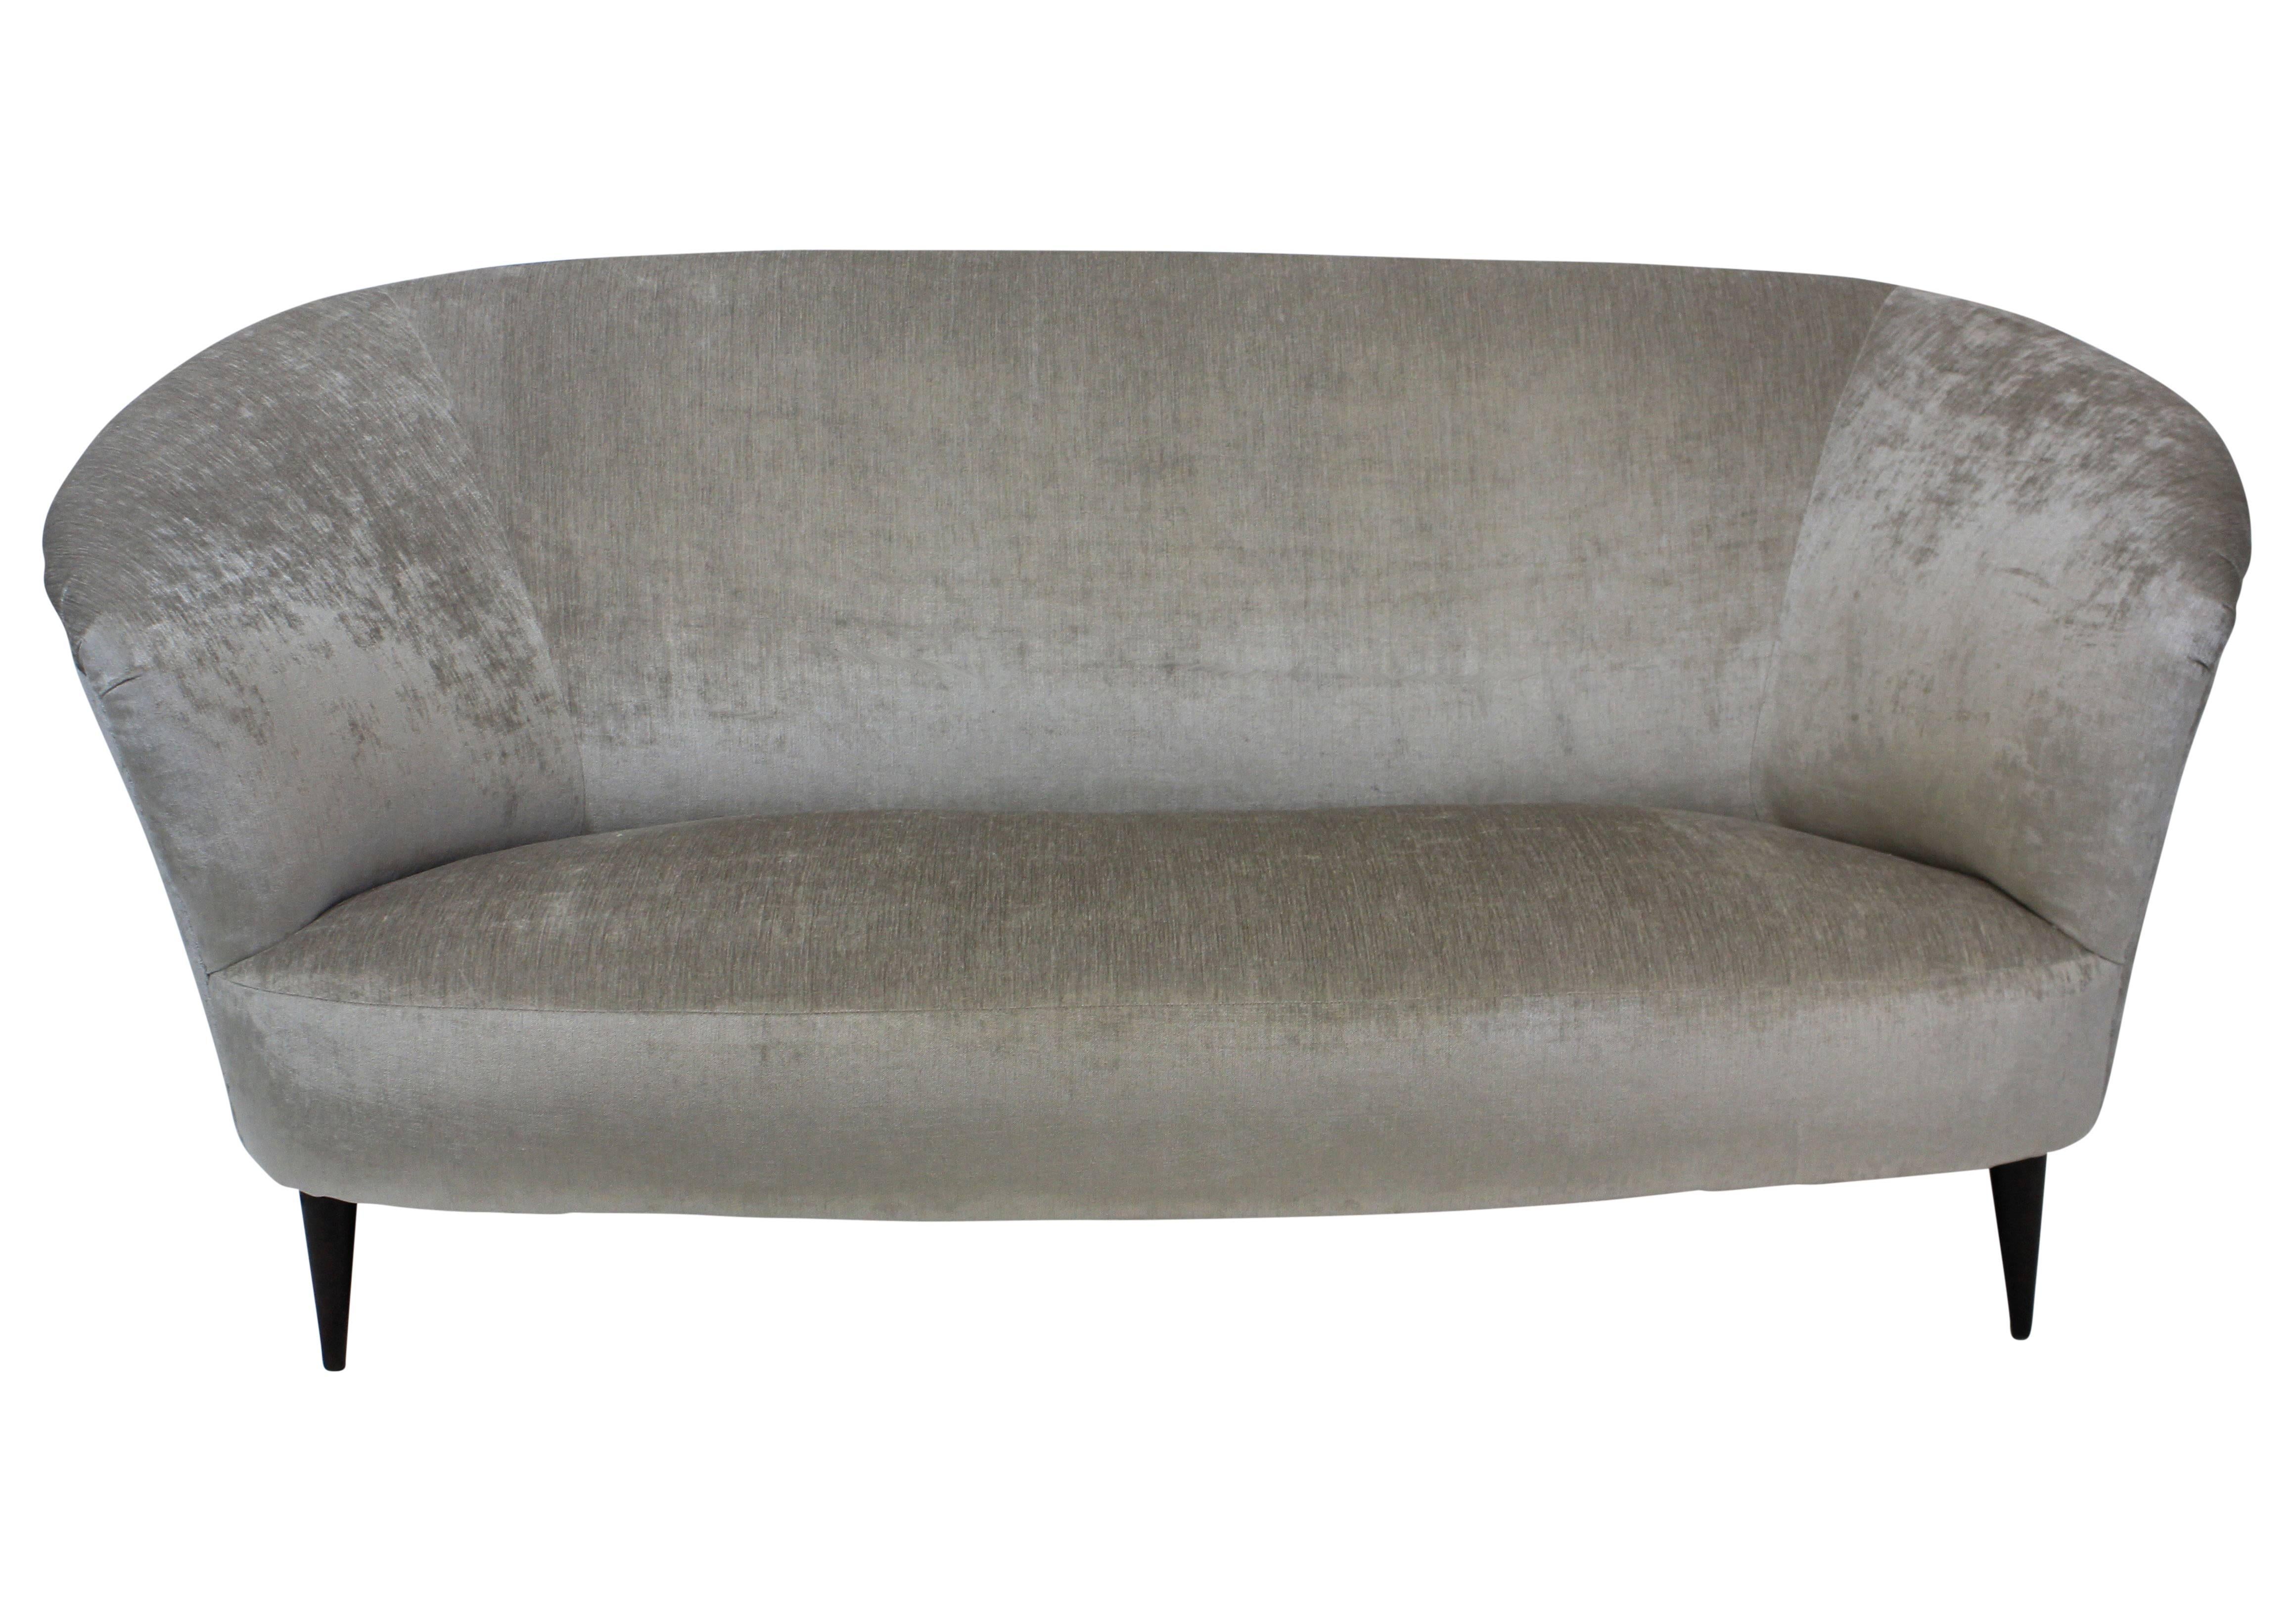 An Italian curved sofa by Ico Parisi of beautiful design and comfort. Newly upholstered in silver-grey velvet.